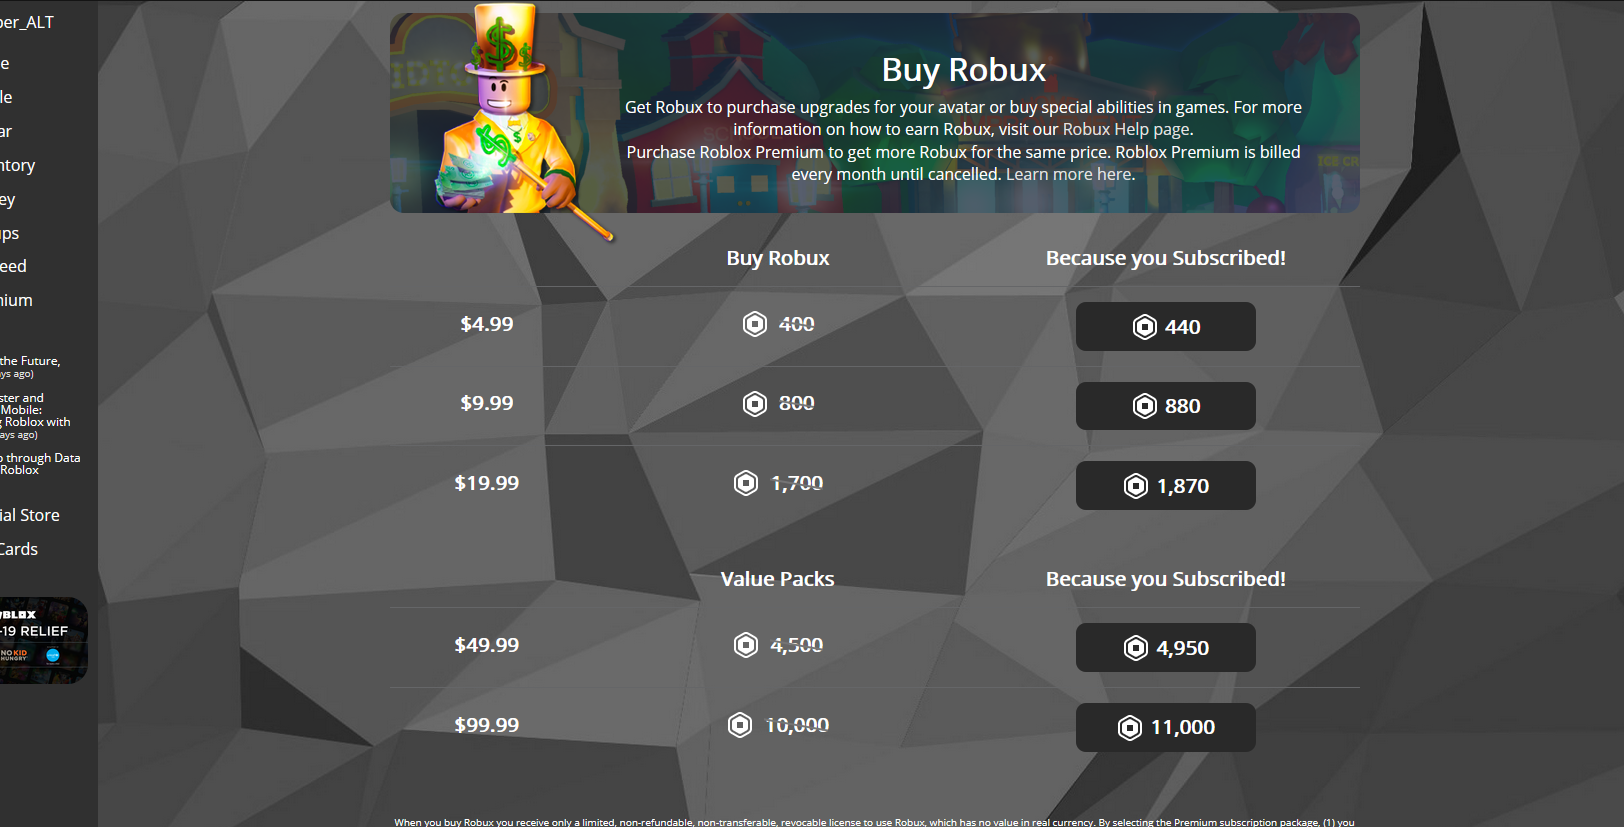 How to Buy 80 Robux on the Roblox Website - Playbite